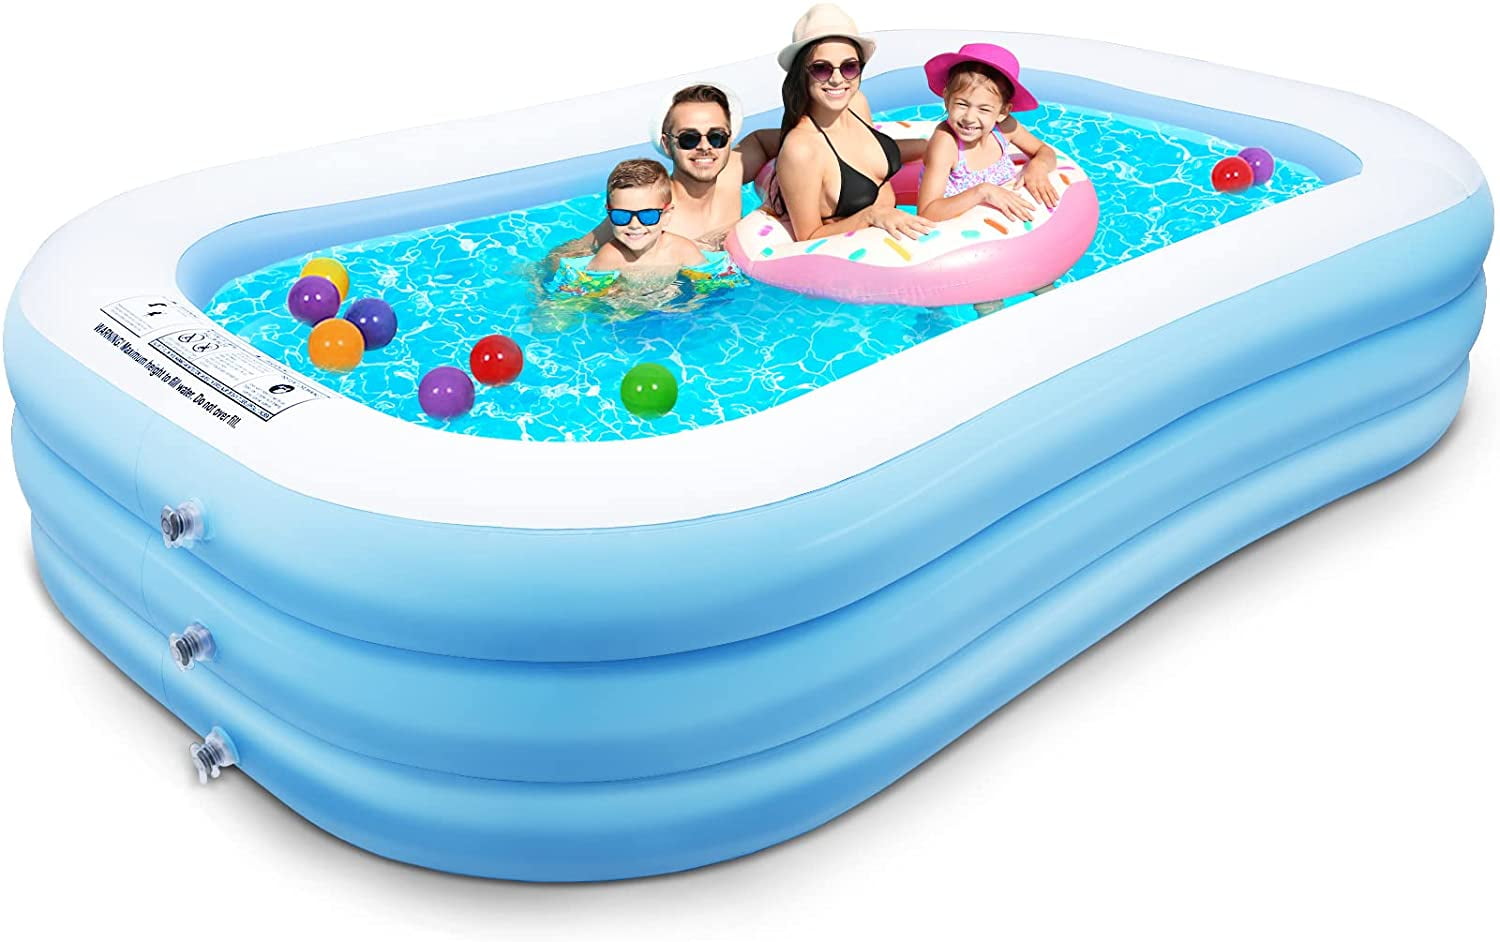 GooGo Inflatable Family Swimming Pool 92" X 56" X 20" by Homech 